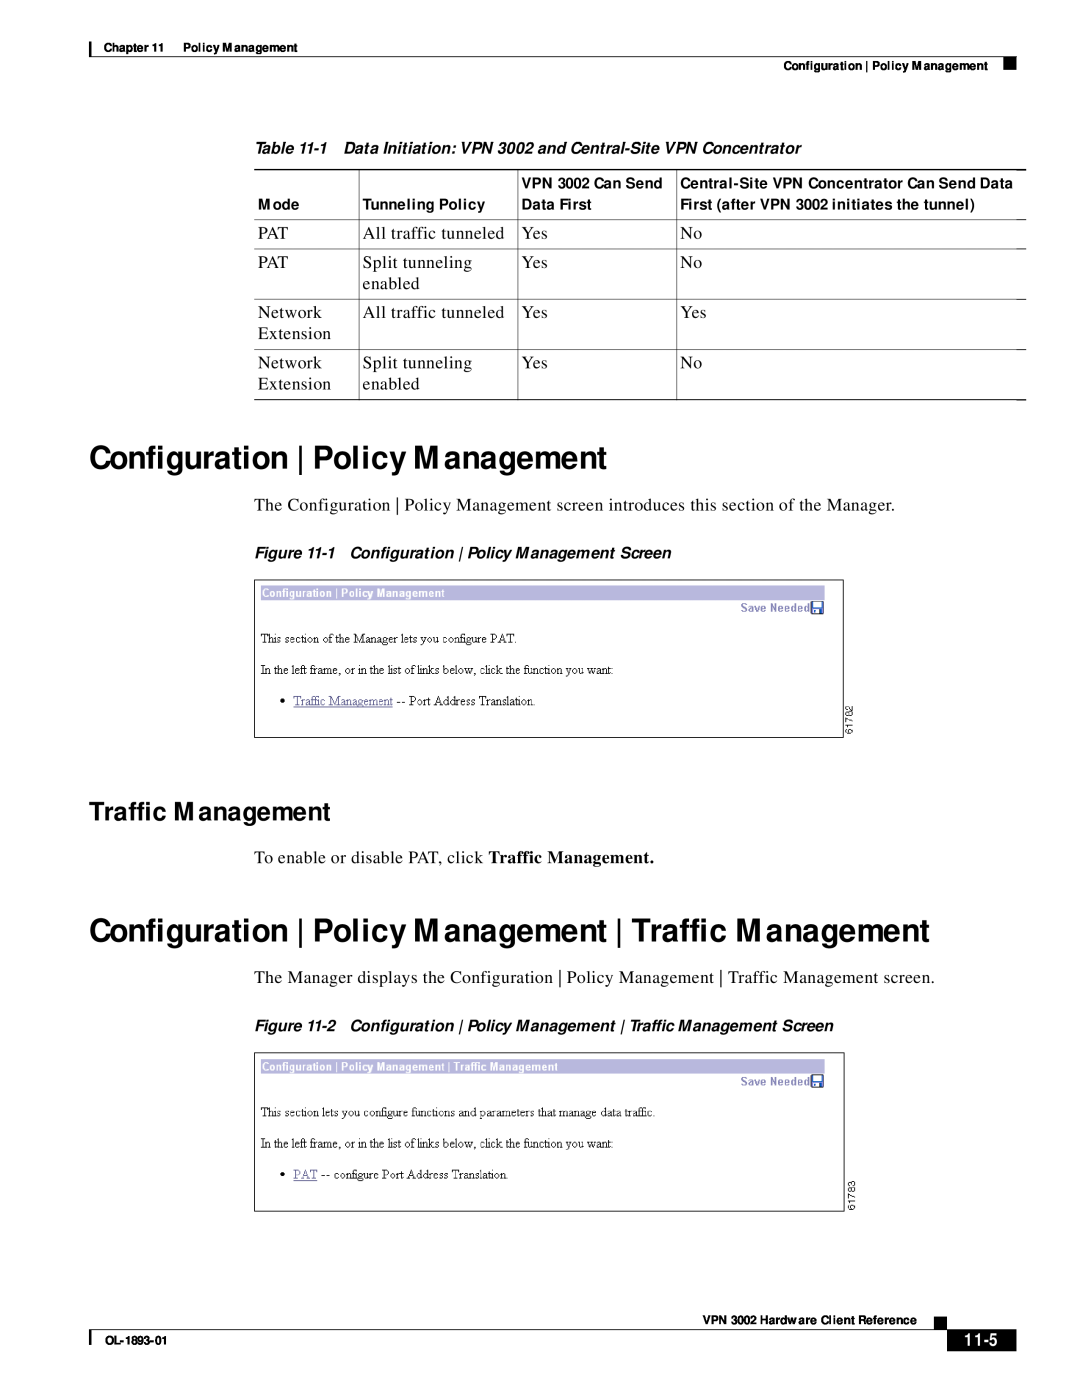 Cisco Systems VPN 3002 Configuration | Policy Management, Traffic Management, Mode, Tunneling Policy, Data First, 11-5 